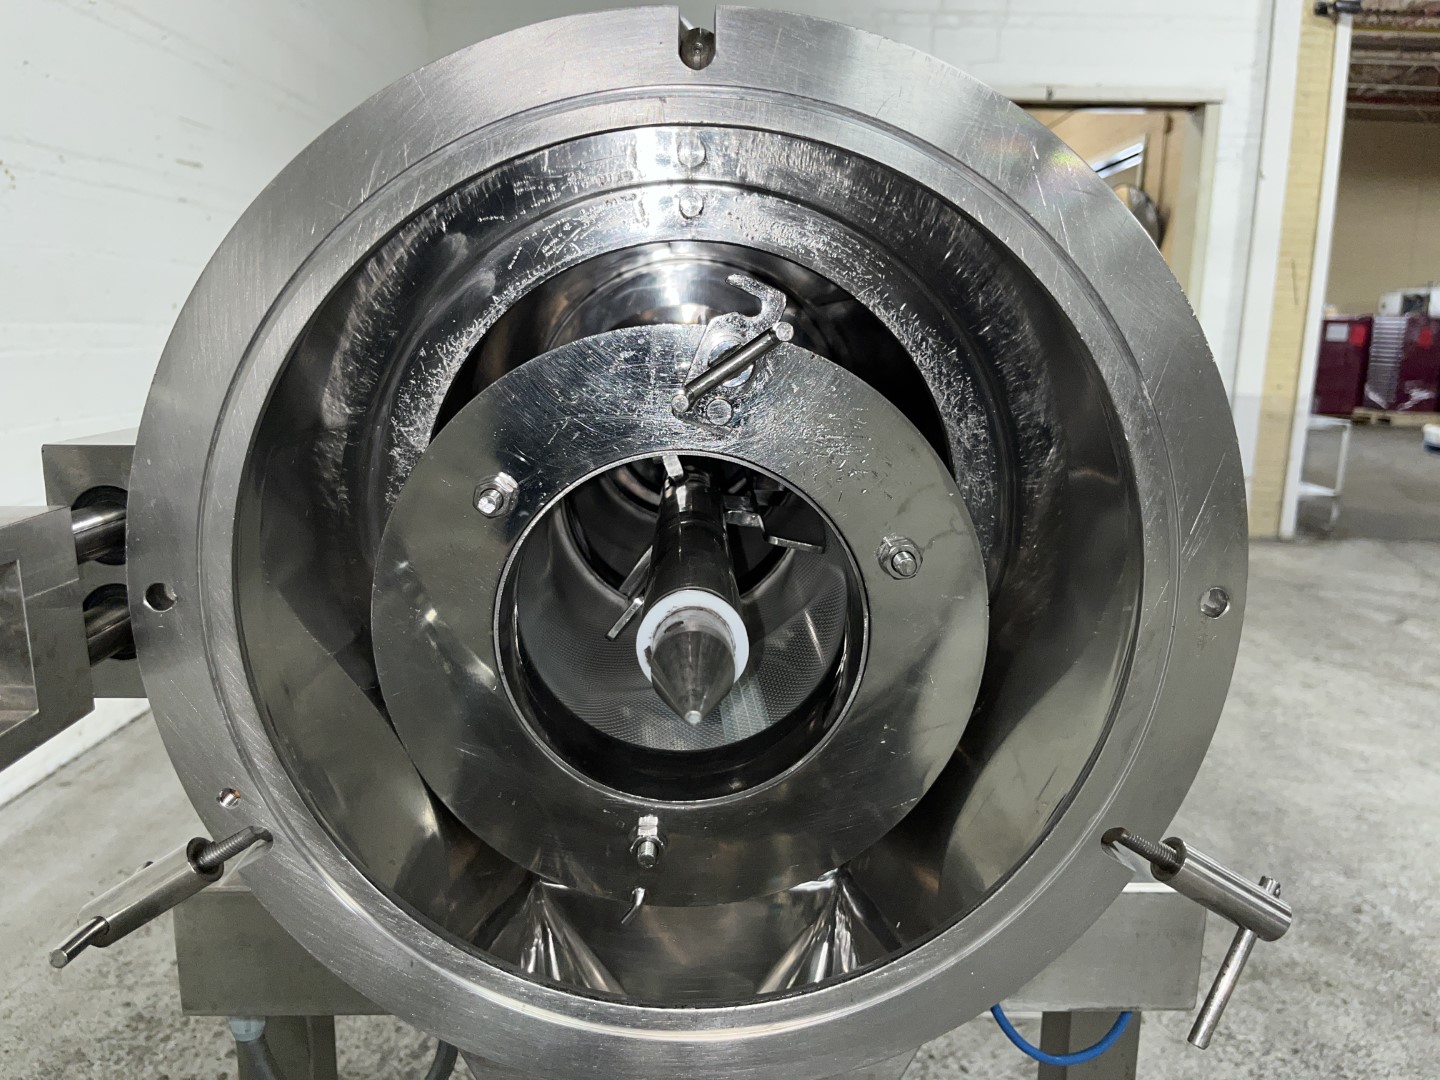 Cos.Mec Centrifugal Sifter, Model S65, S/S